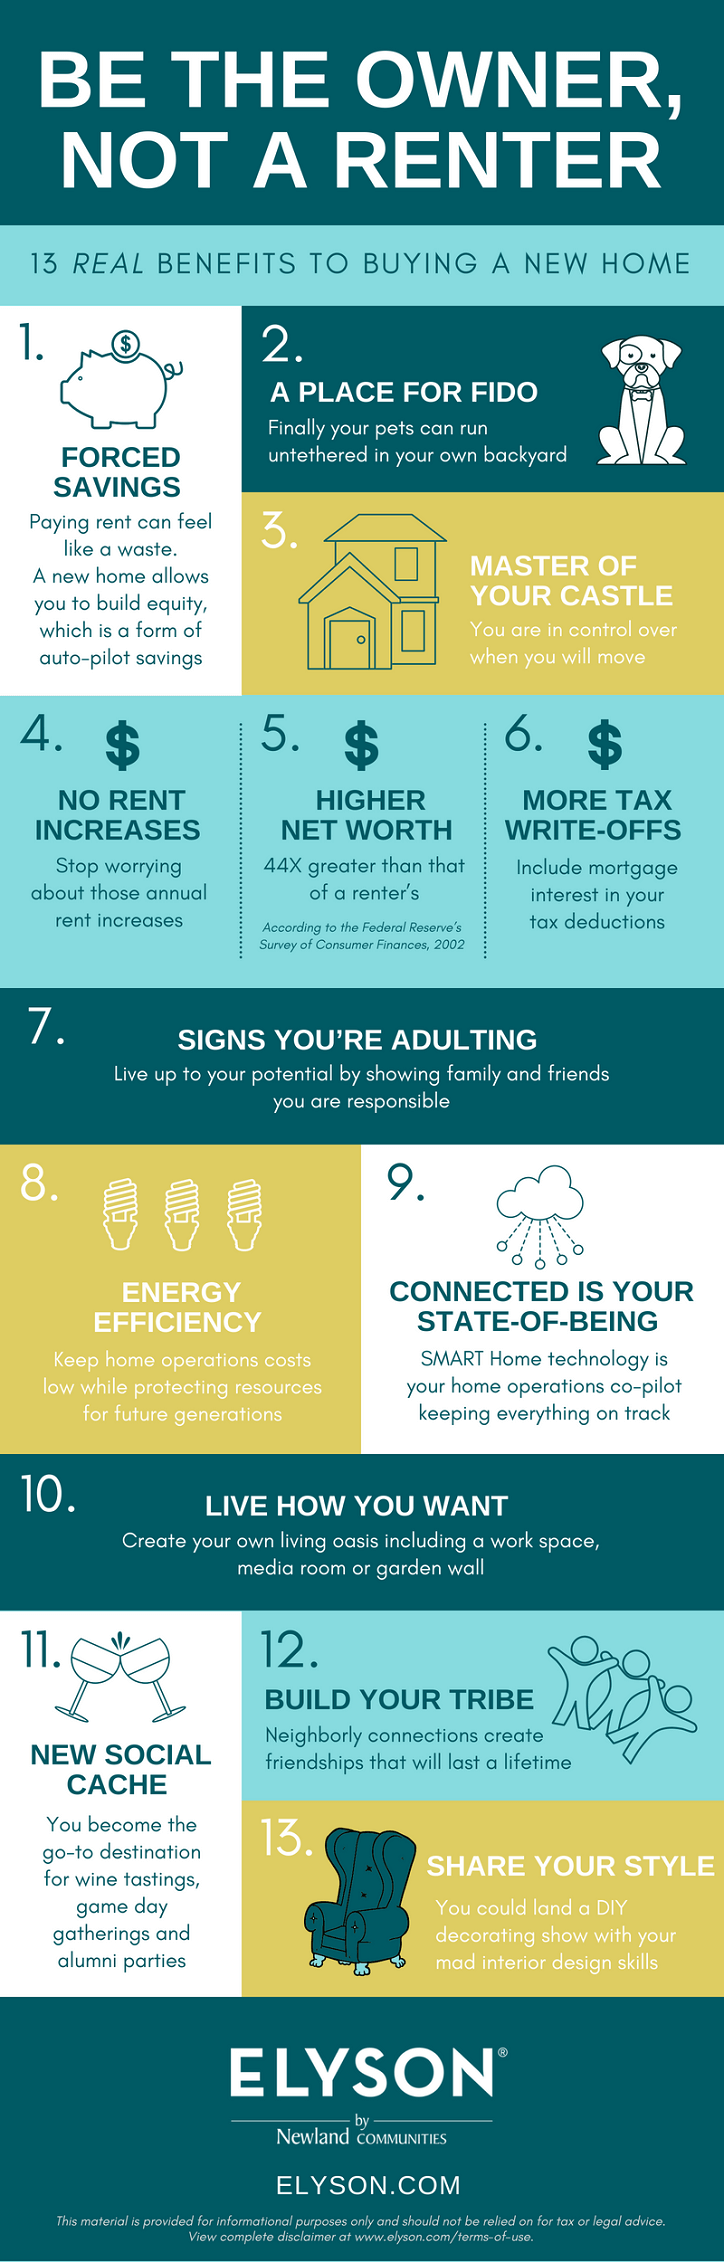 Infographic: 13 reasons why it's better to be an owner than renter